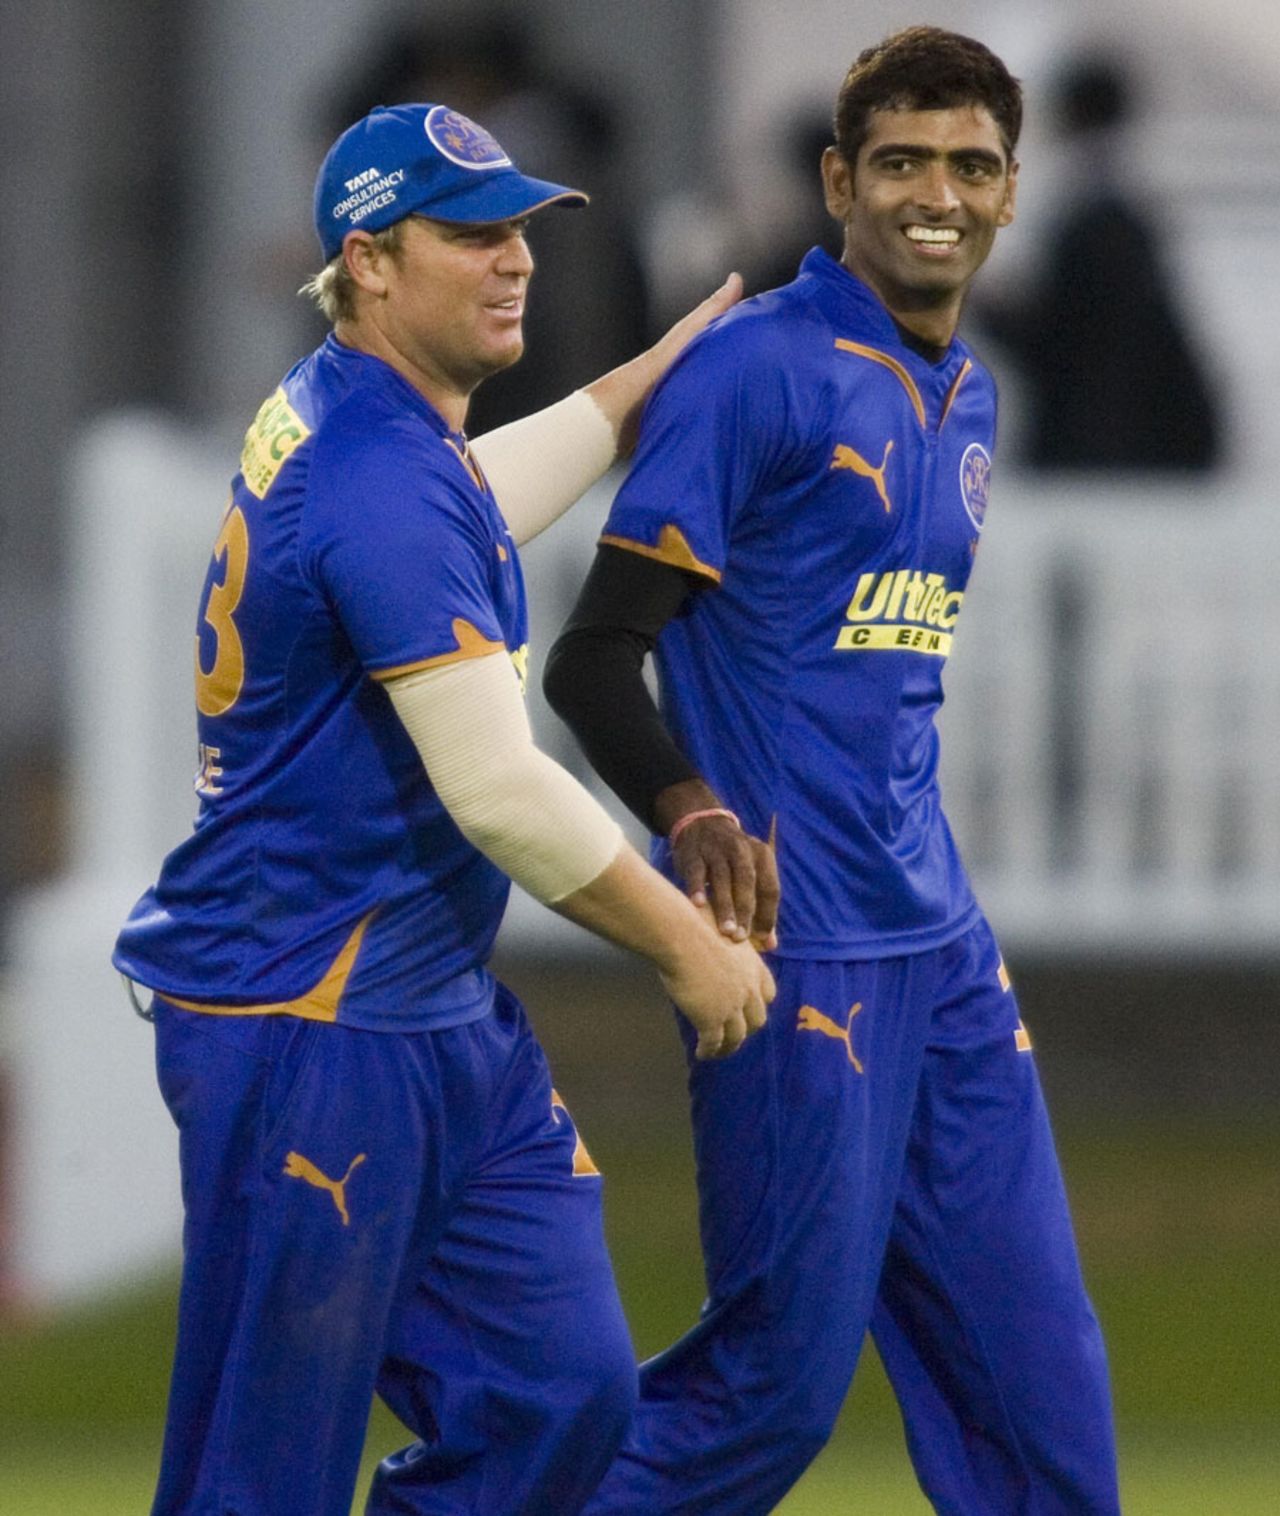 Shane Warne and Amit Singh celebrate a wicket, Middlesex v Rajasthan Royals, 20/20 British Asian Challenge, Lord's, July 6, 2009